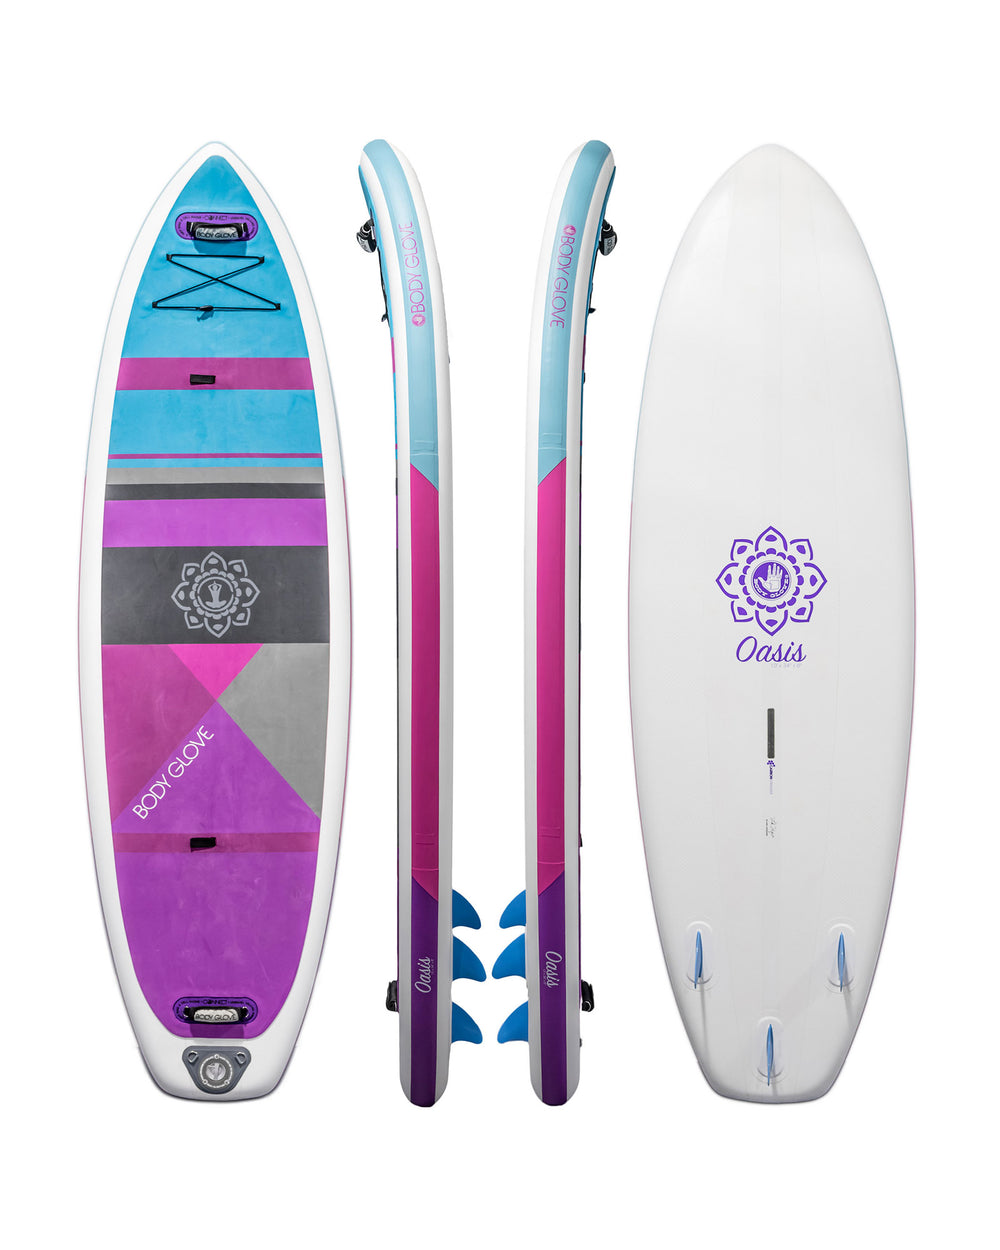 Oasis Yoga Fitness Inflatable Paddle Board - Purple/White